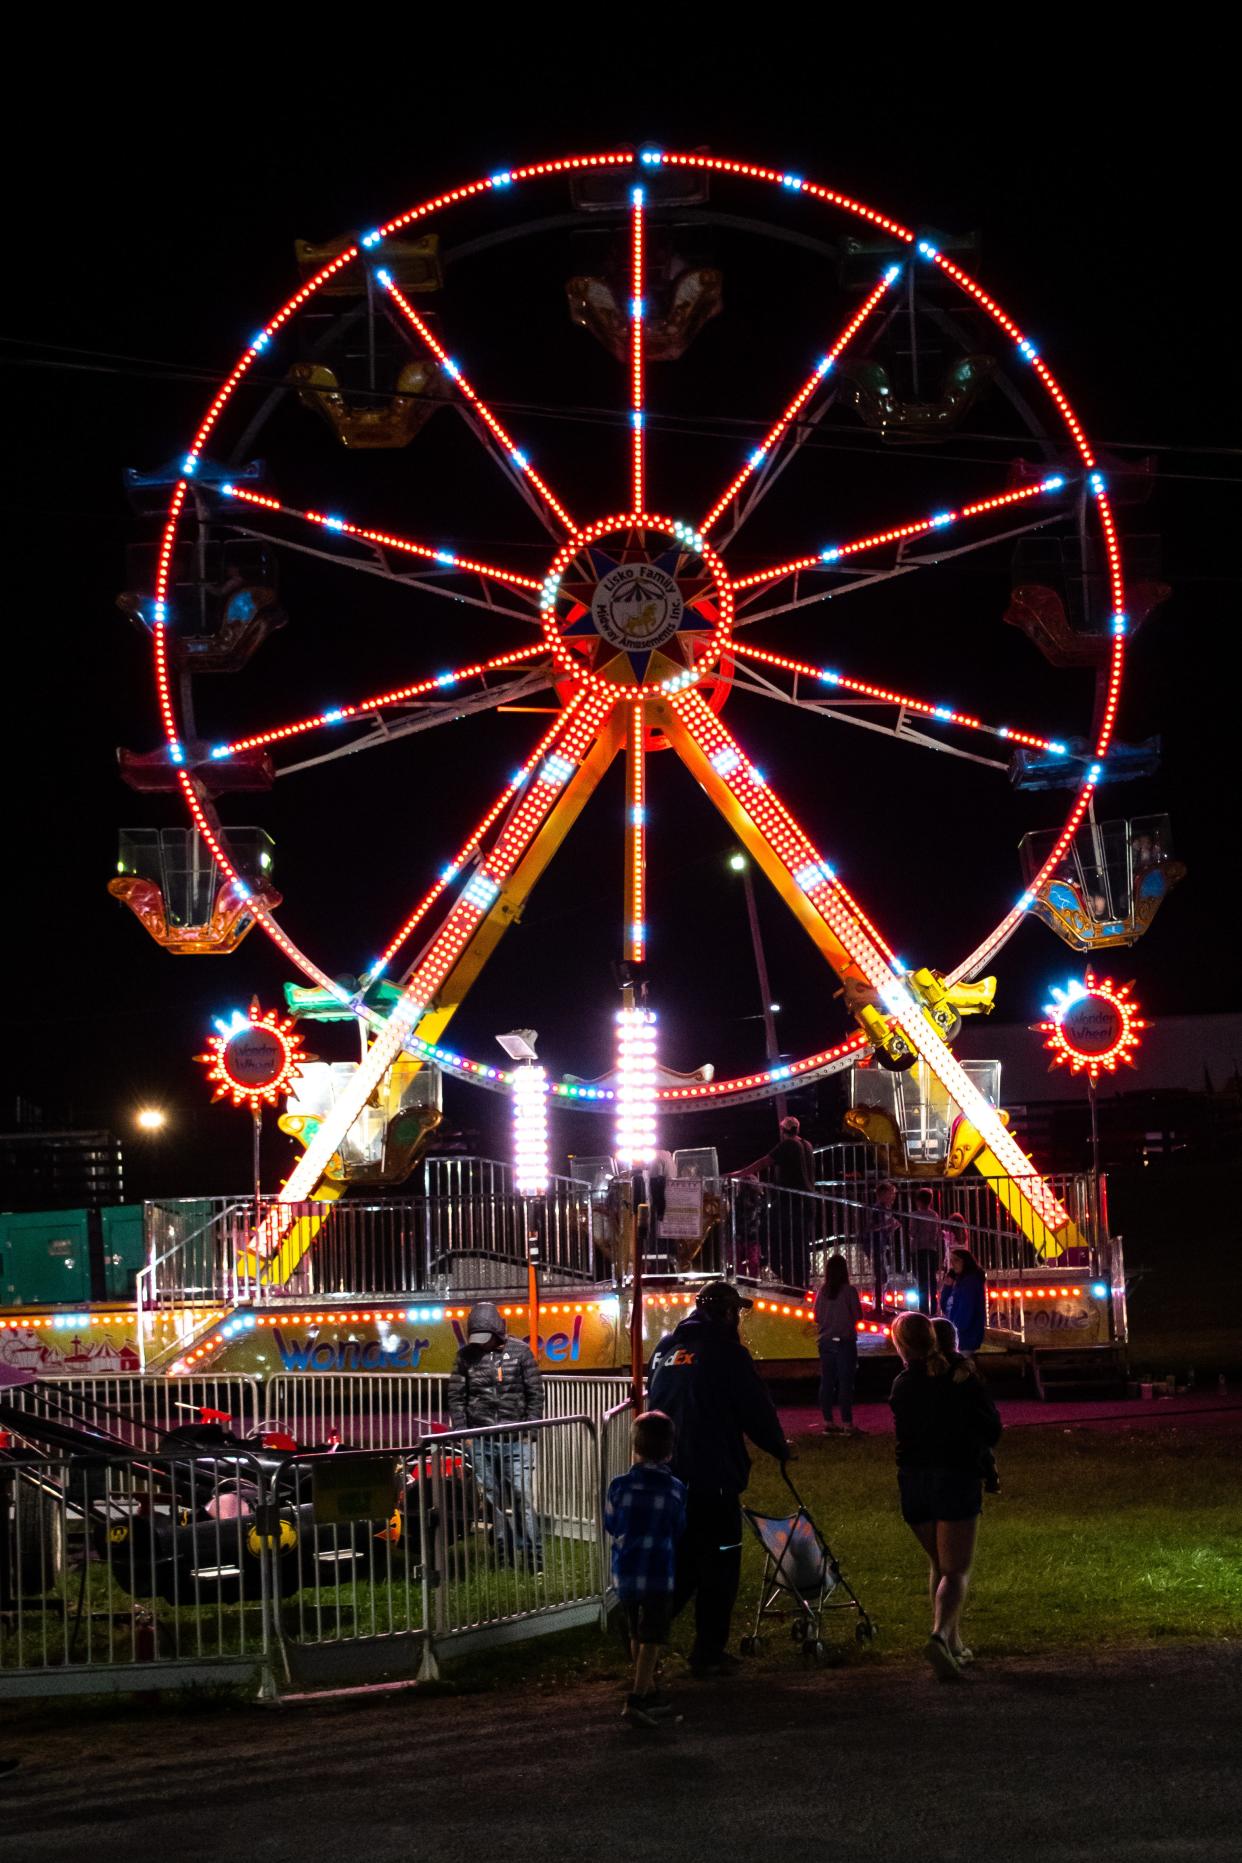 The Night at the Races will benefit the Guernsey County fair and fairgrounds. This year's event will be held April 19, at Deerassic Park. For tickets call 740-260-0689.